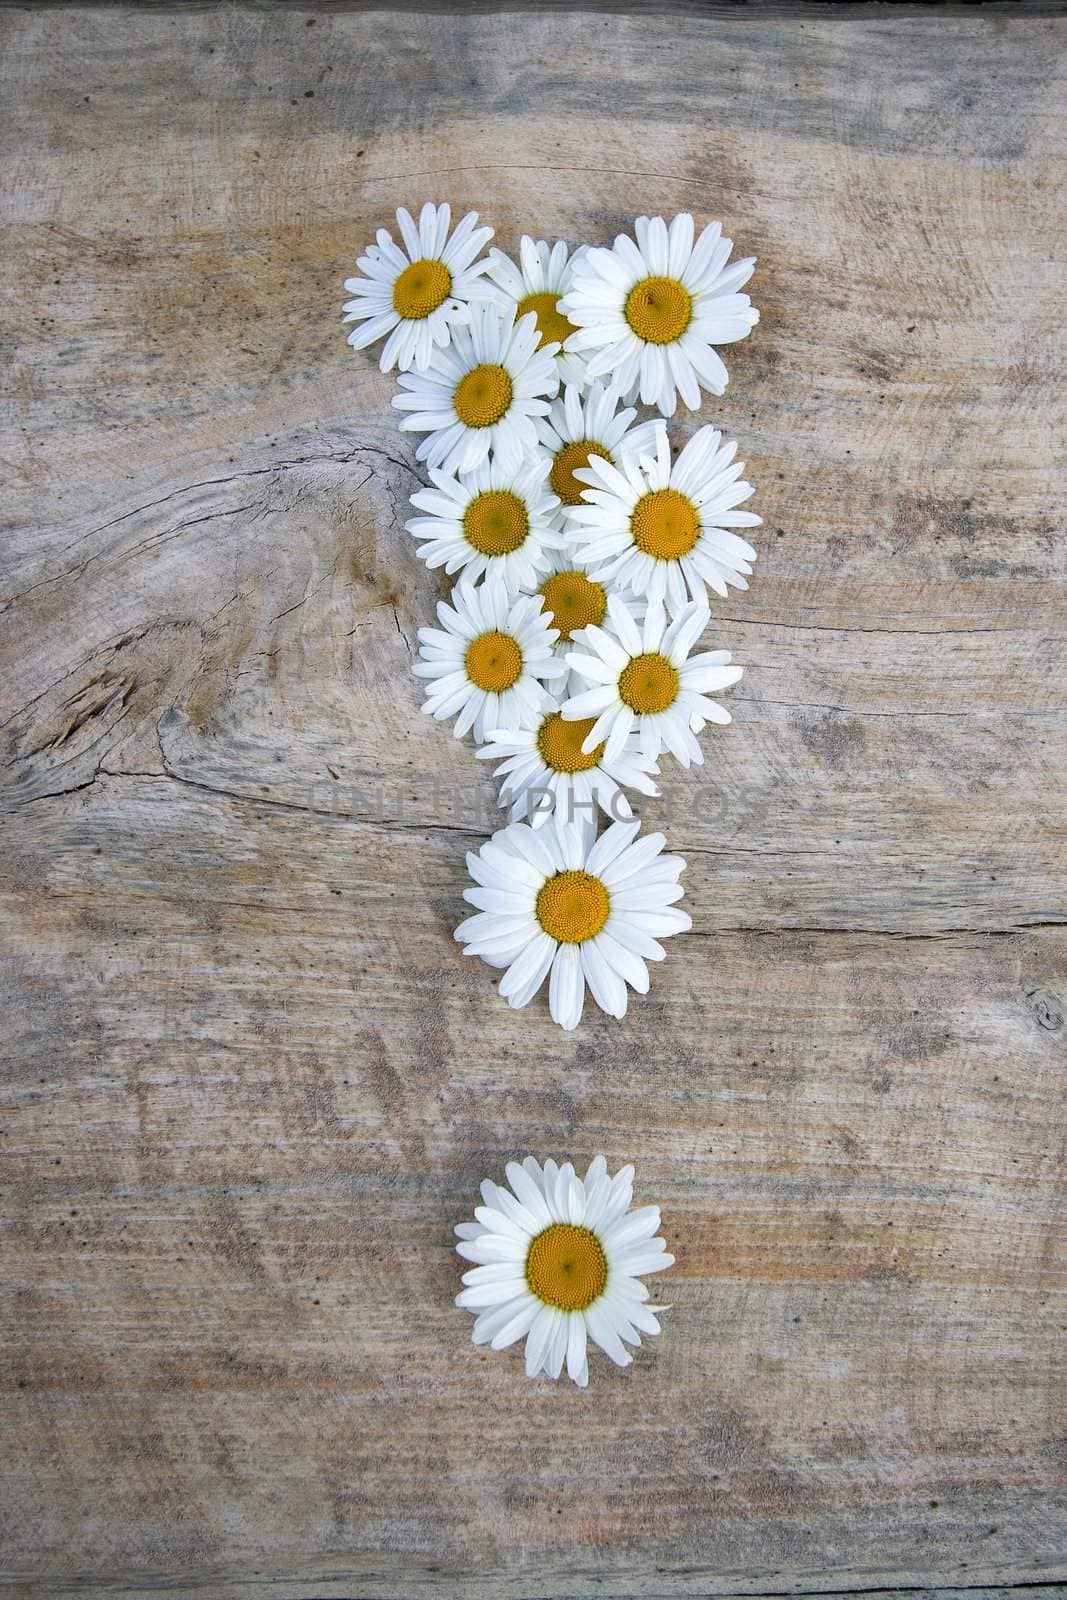 Daisy exclamation mark on wooden background